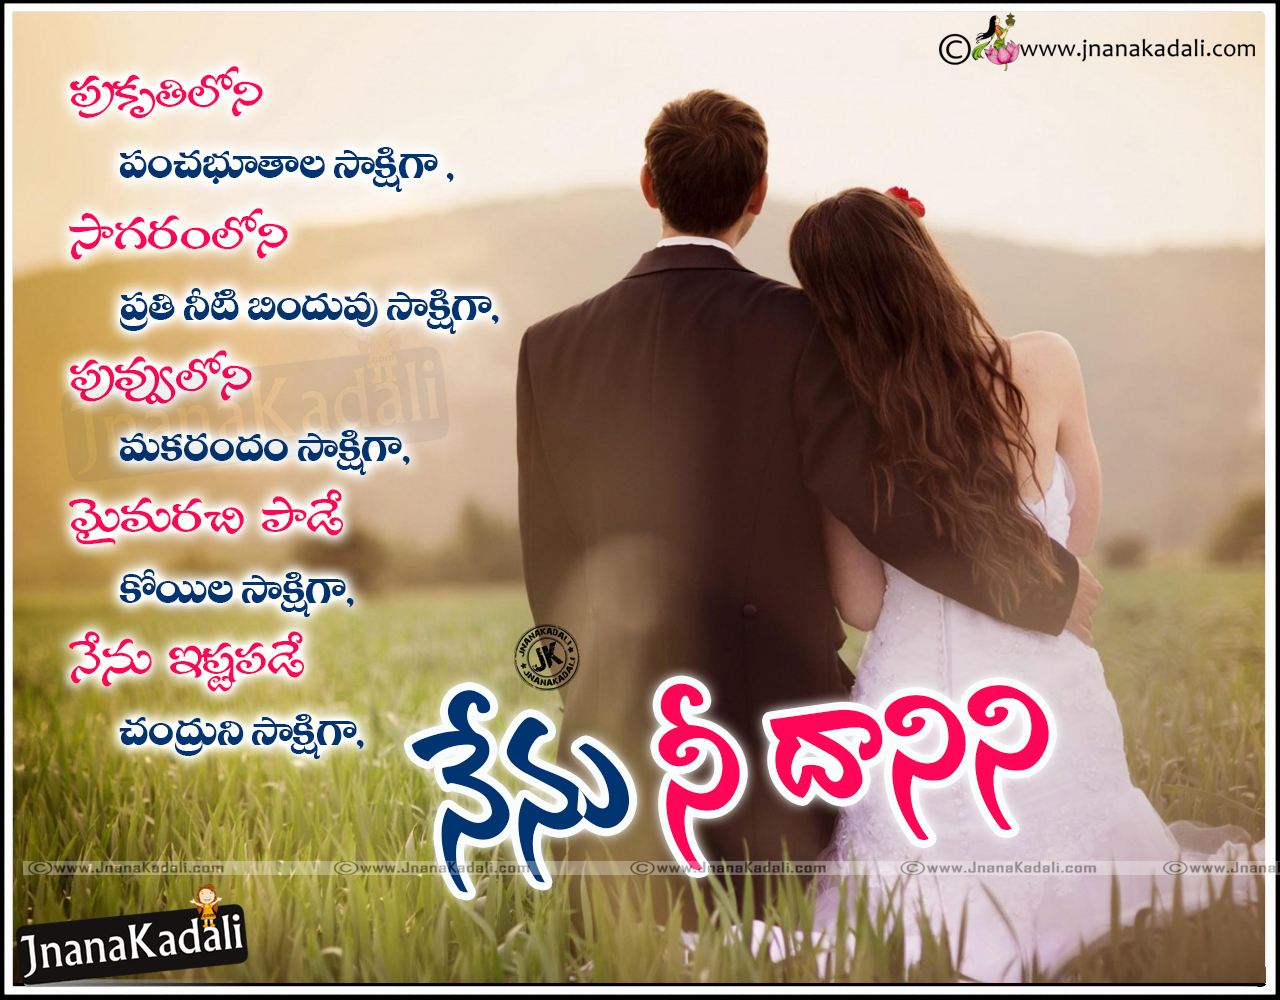 Here is a Telugu Heart Touching Love Feelings images for Girls Boys es Side Love Quotes Love Wallpapers Telugu Girl Love Proposing Tips and Top